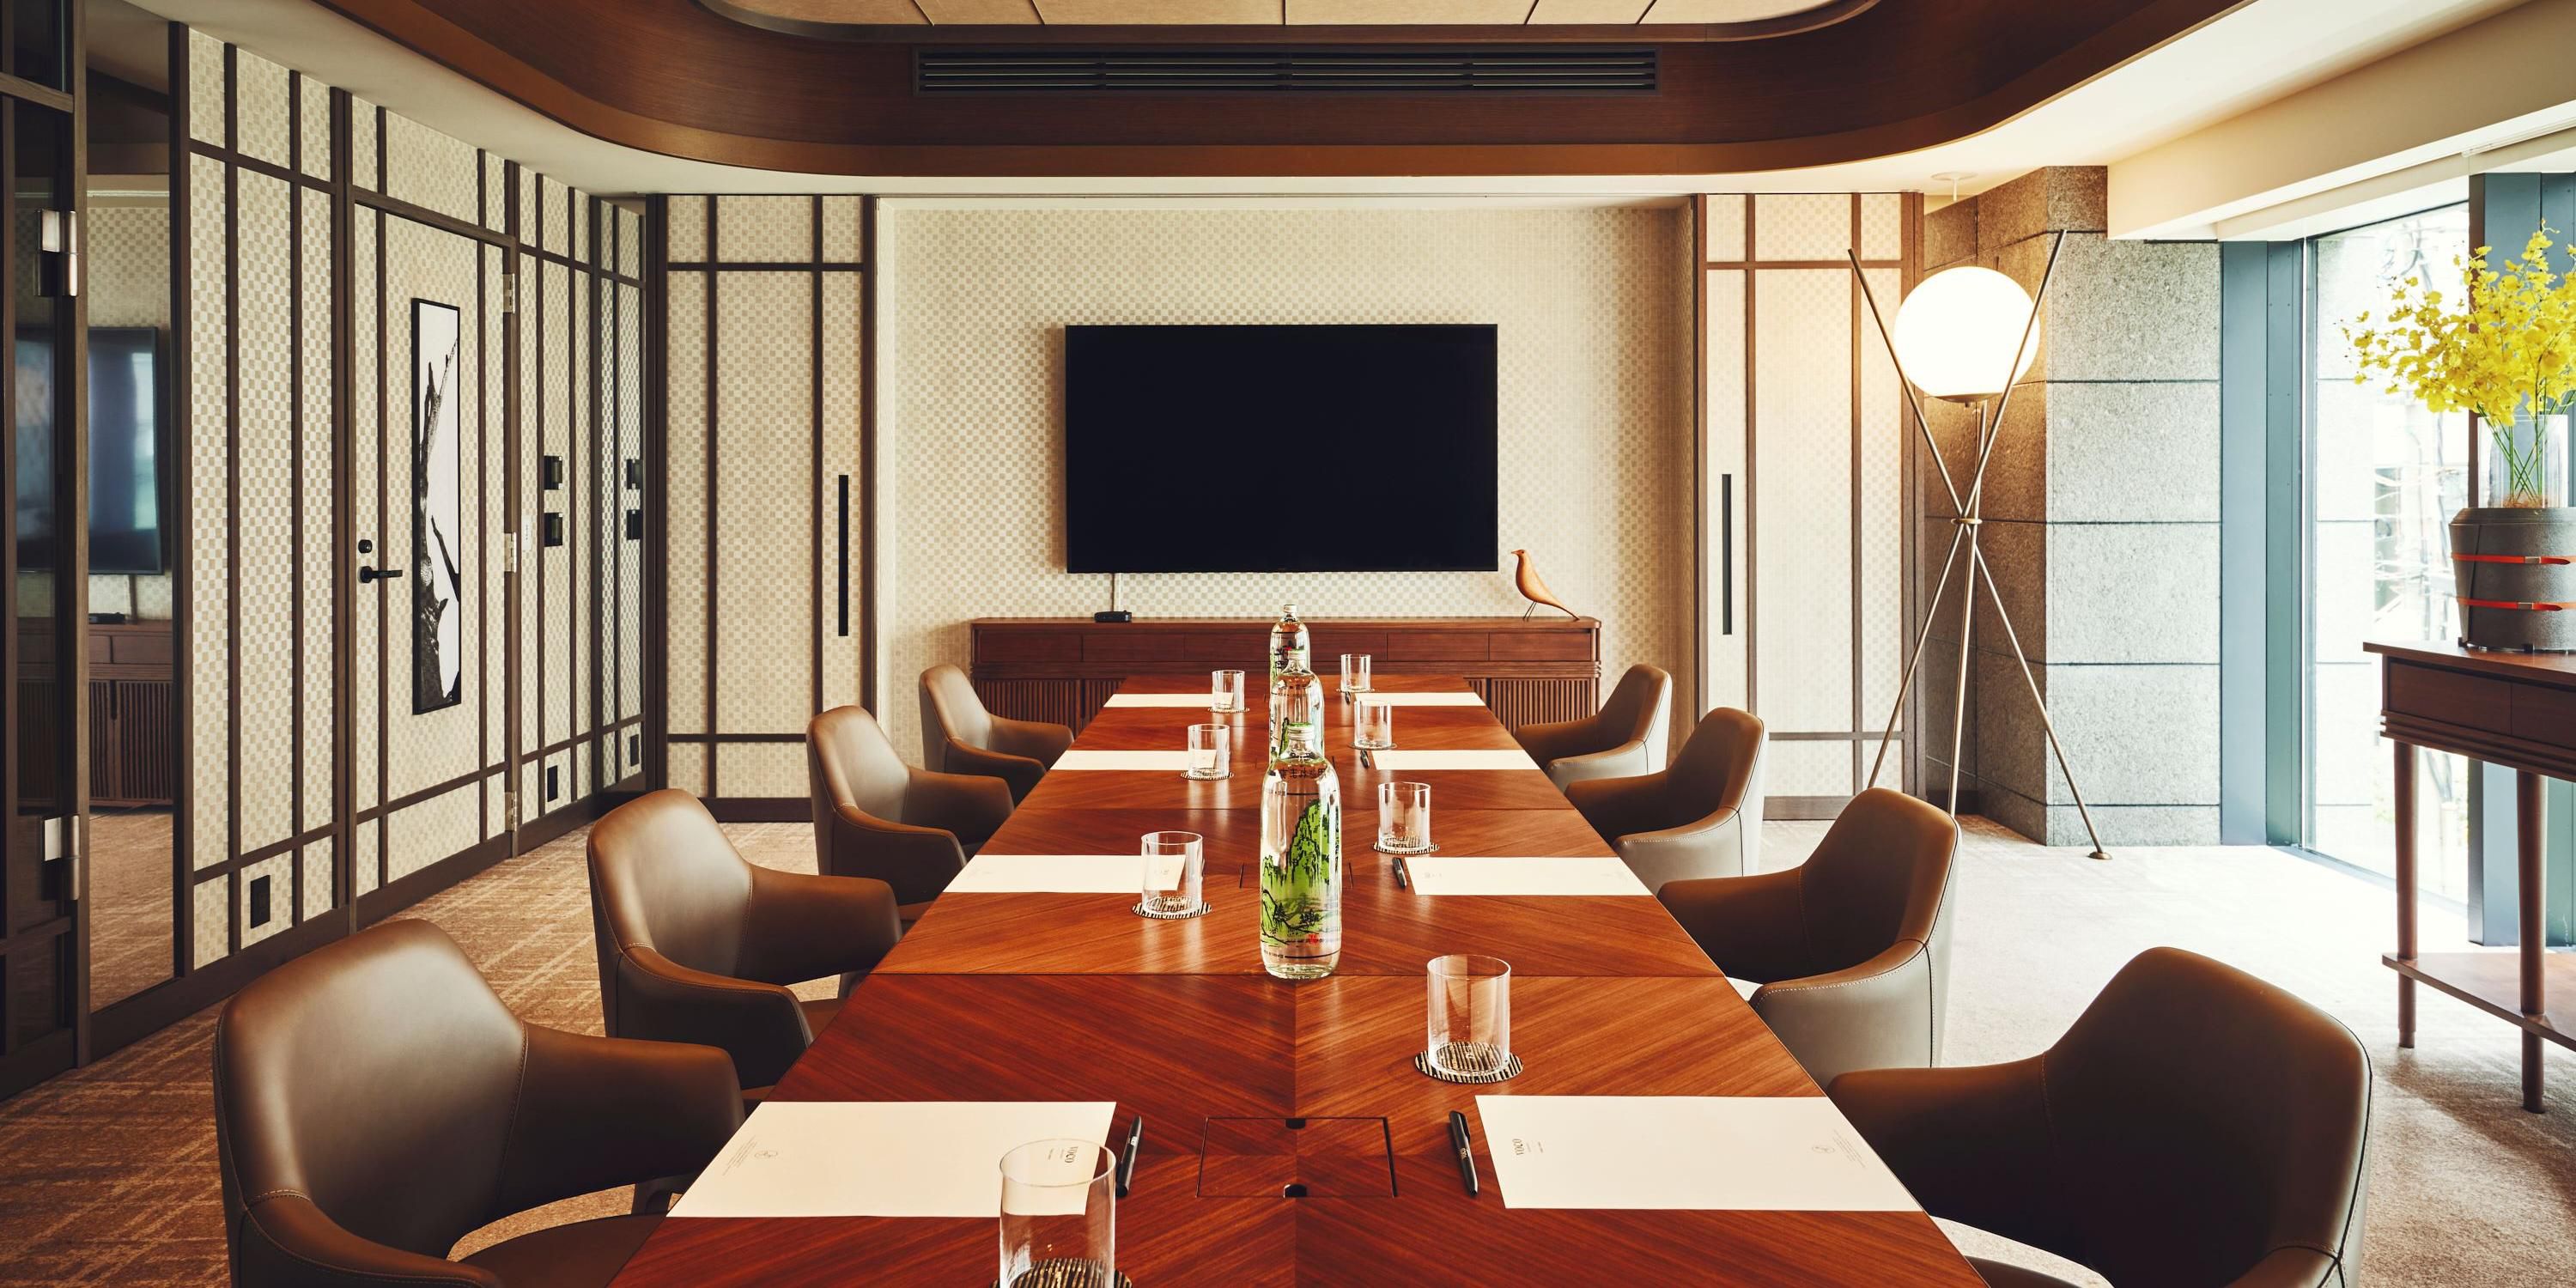 Looking for a place to host an intimate and personal meeting? Look no further as you are just one step away from the perfect venue.
We've got all the latest tech and stylish menus tailored to any event. Let our welcoming hosts make your experience stress-free from start to finish.